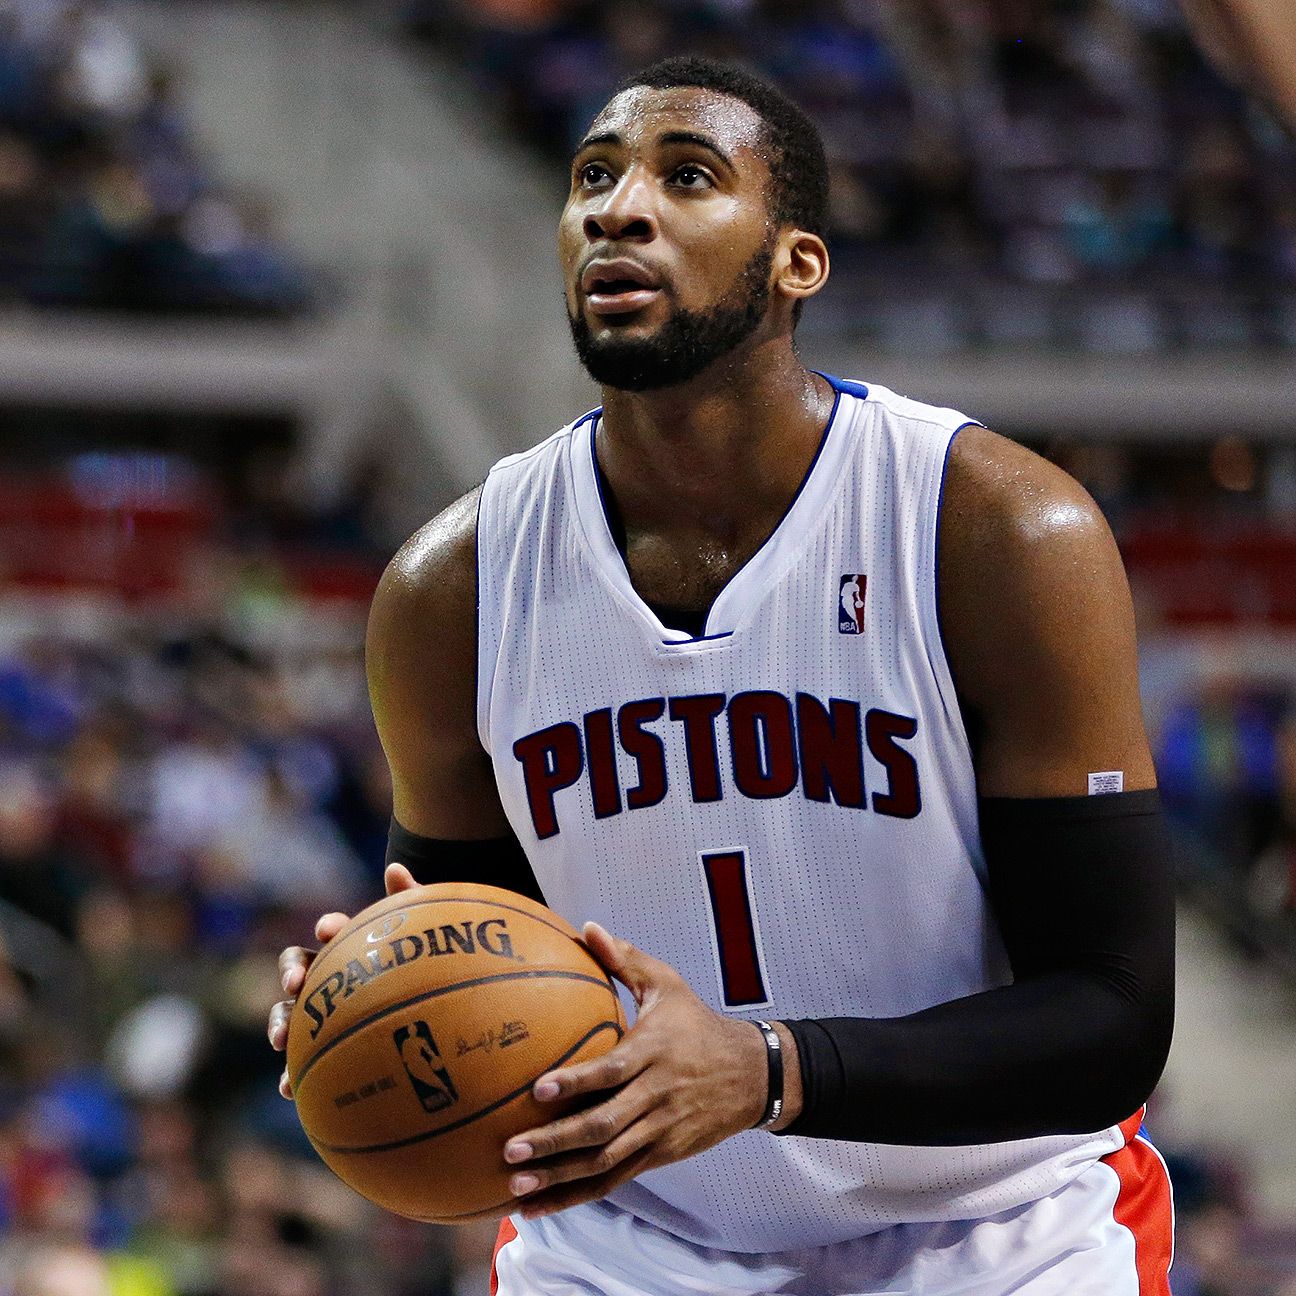 NBA: Sophomore 20 -- Andre Drummond closing in on superstar status for Pistons